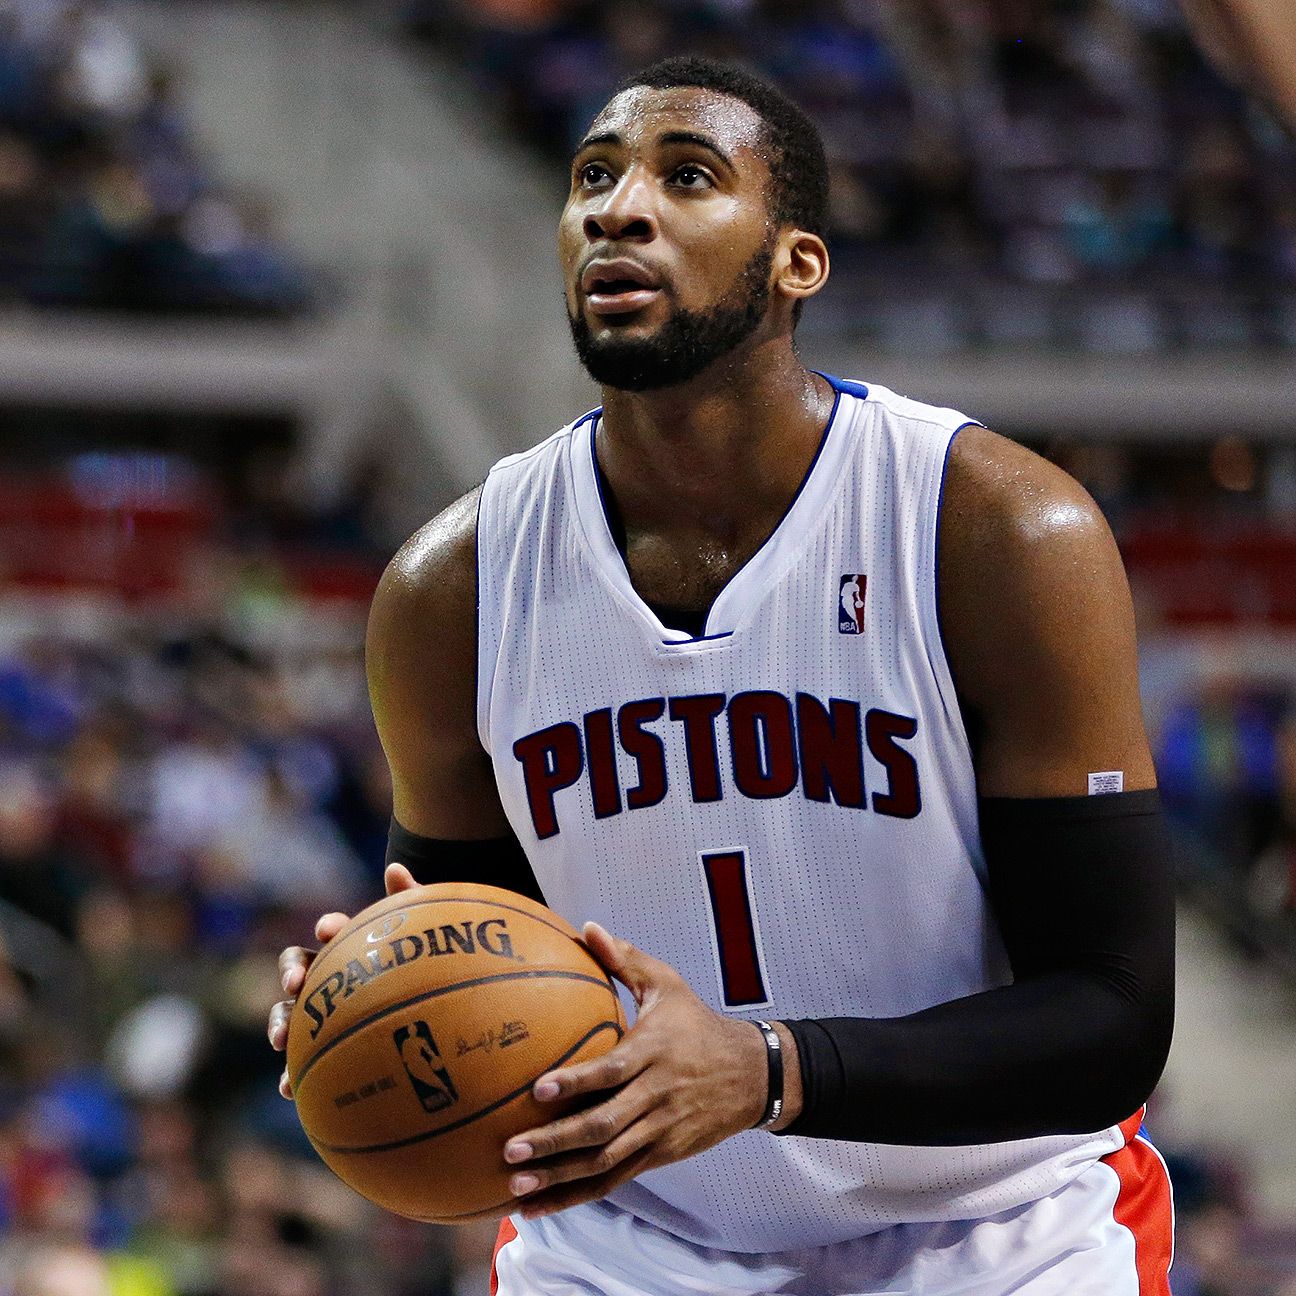 NBA: Sophomore 20 -- Andre Drummond closing in on superstar status for Pistons